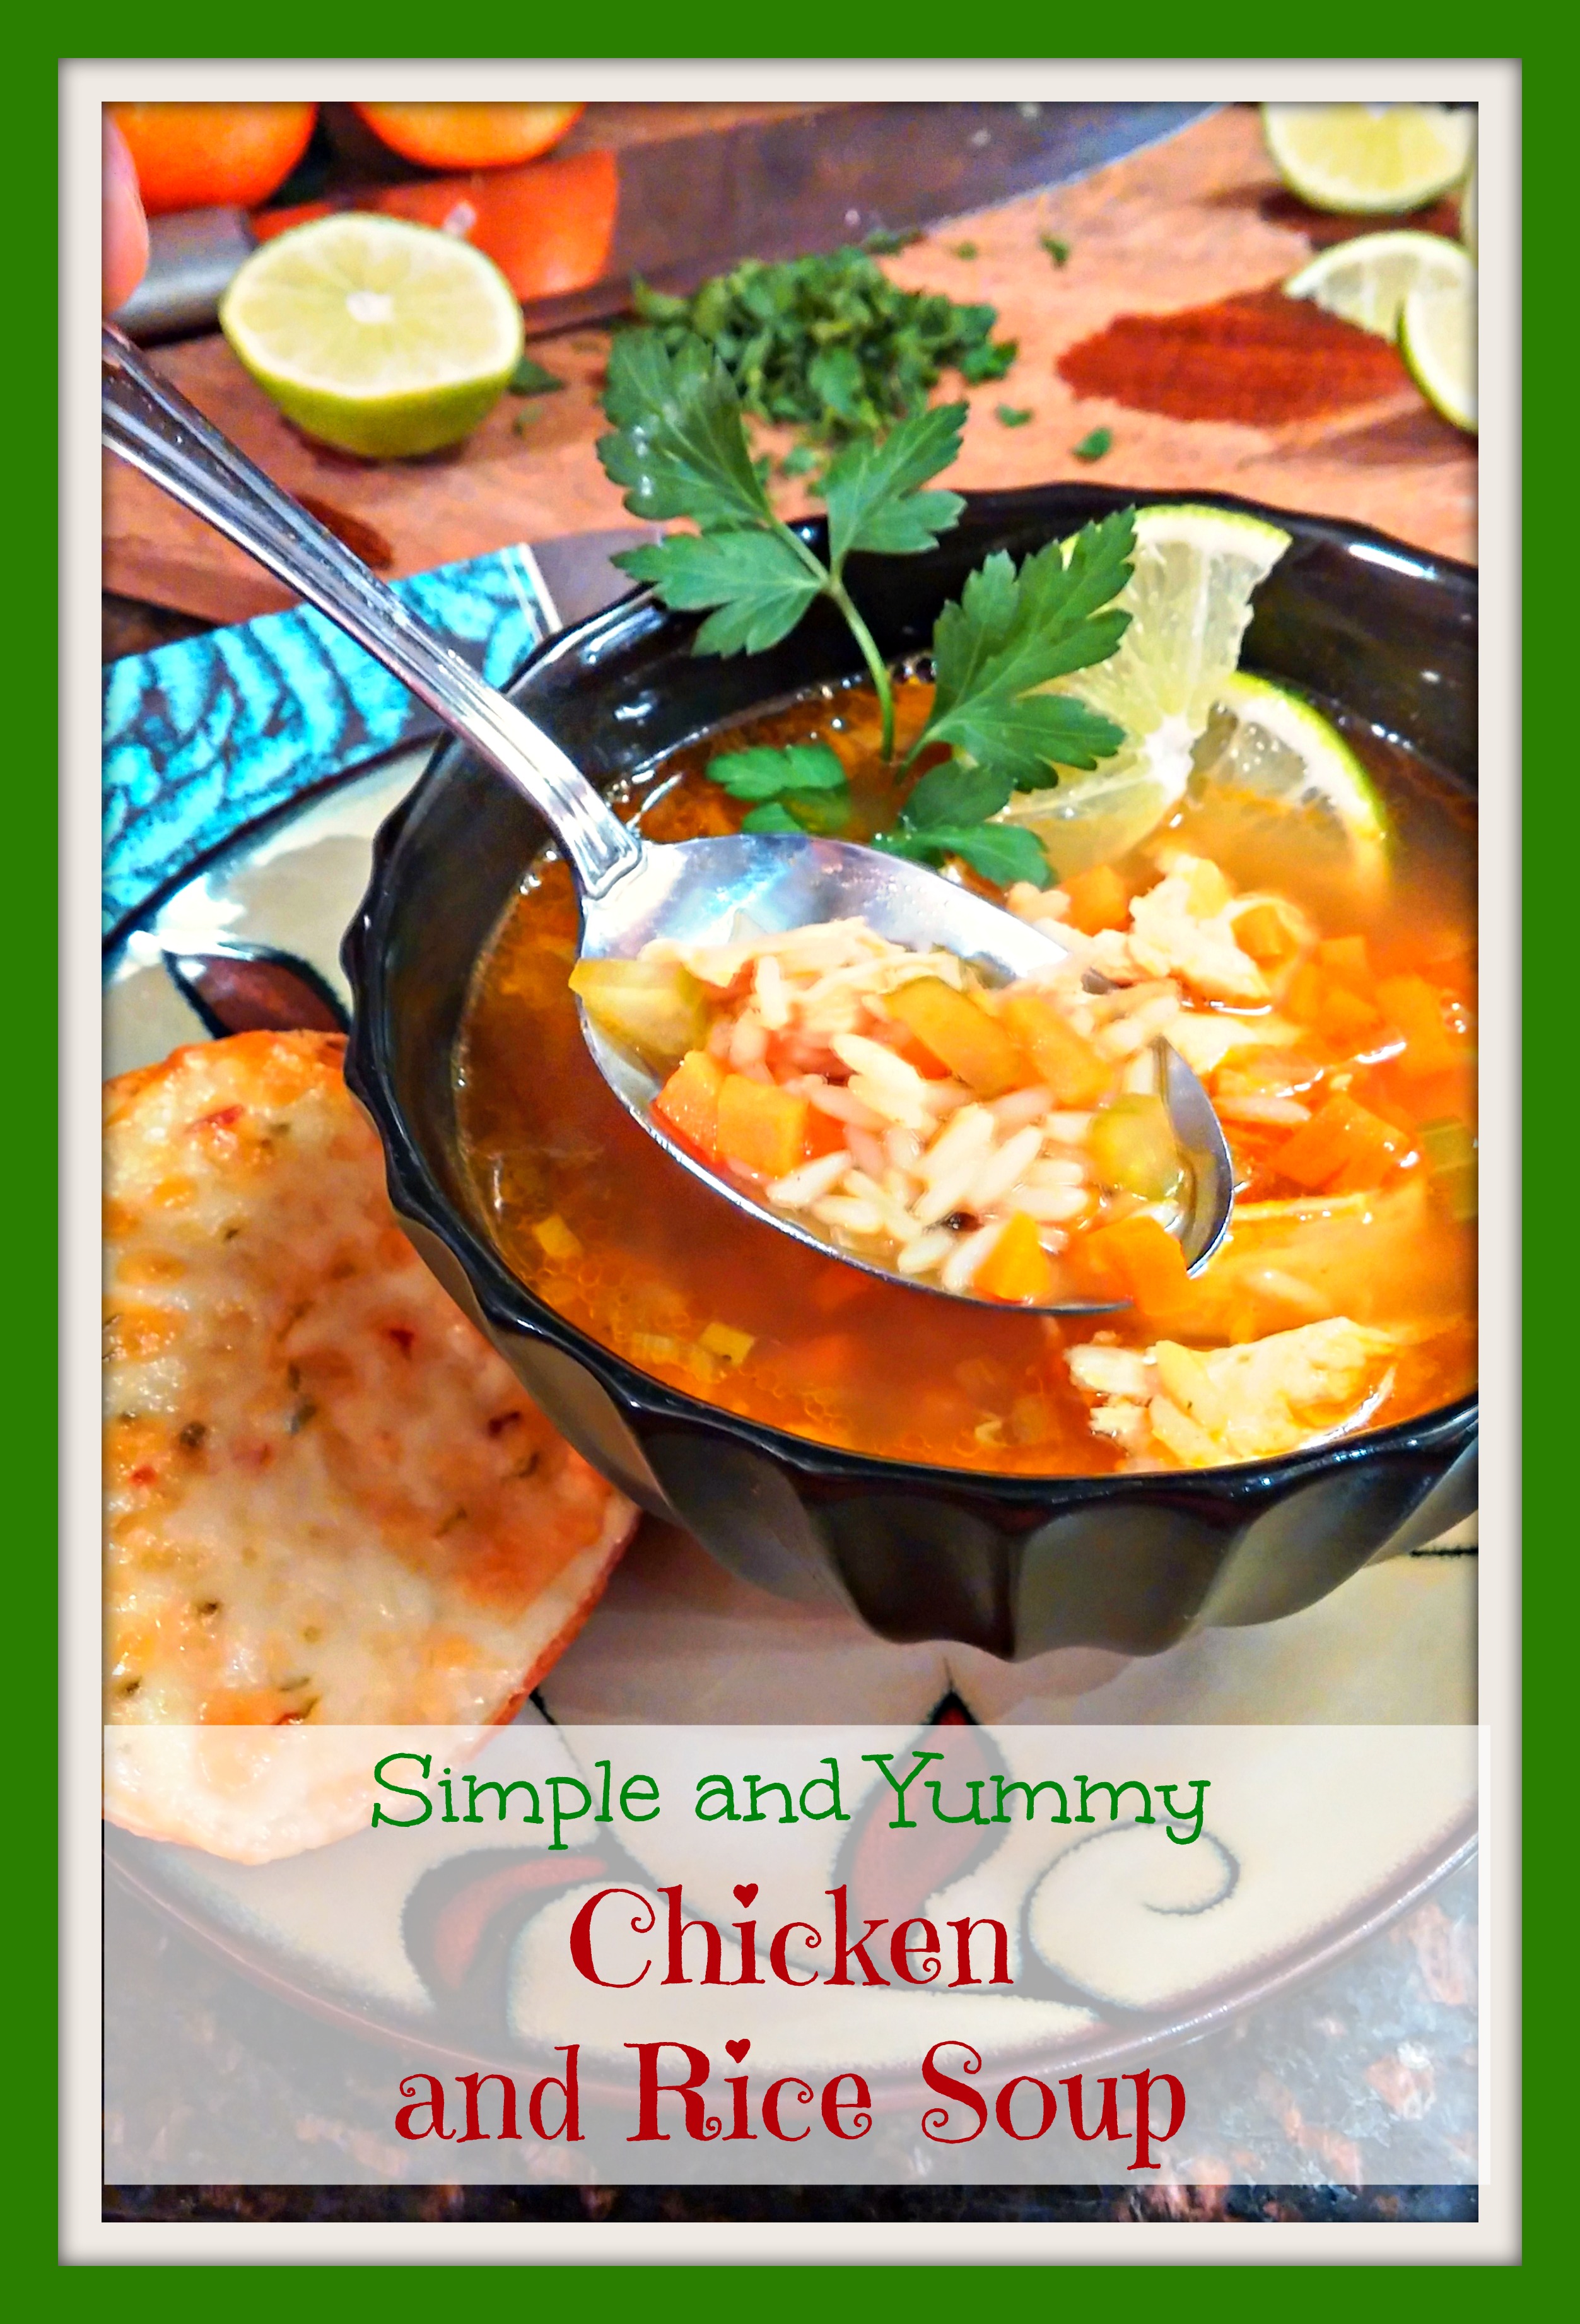 Simple and Yummy Chicken and Rice Soup